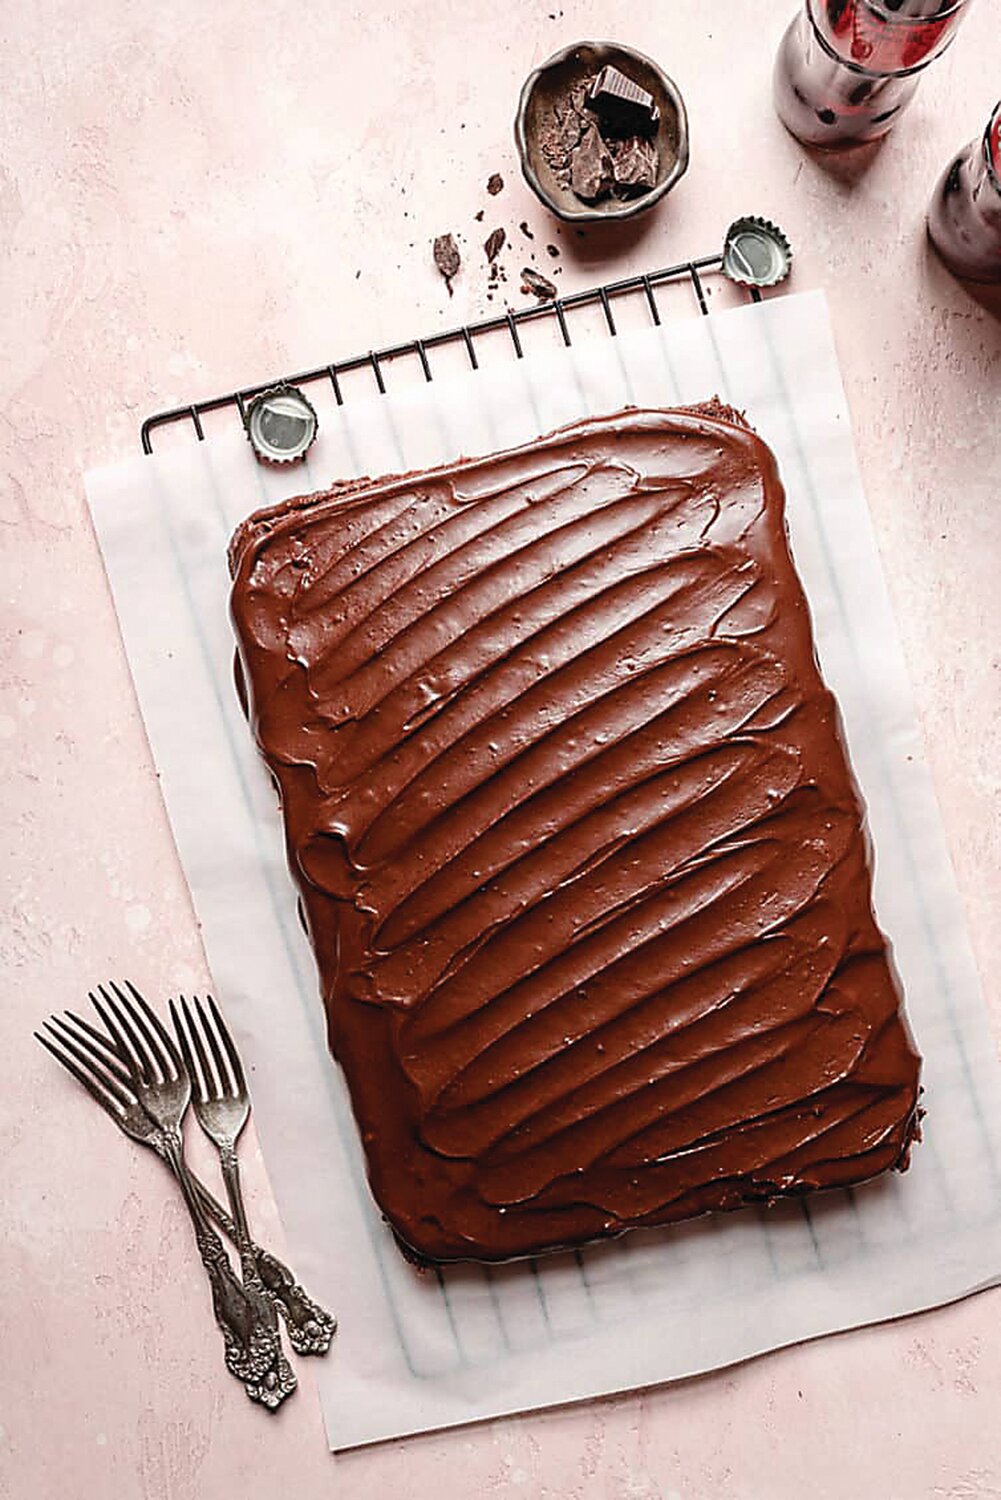 Cola added to this cake makes it taste richer and more chocolatey. Dads and families might enjoy this snack cake during Father’s Day gatherings.